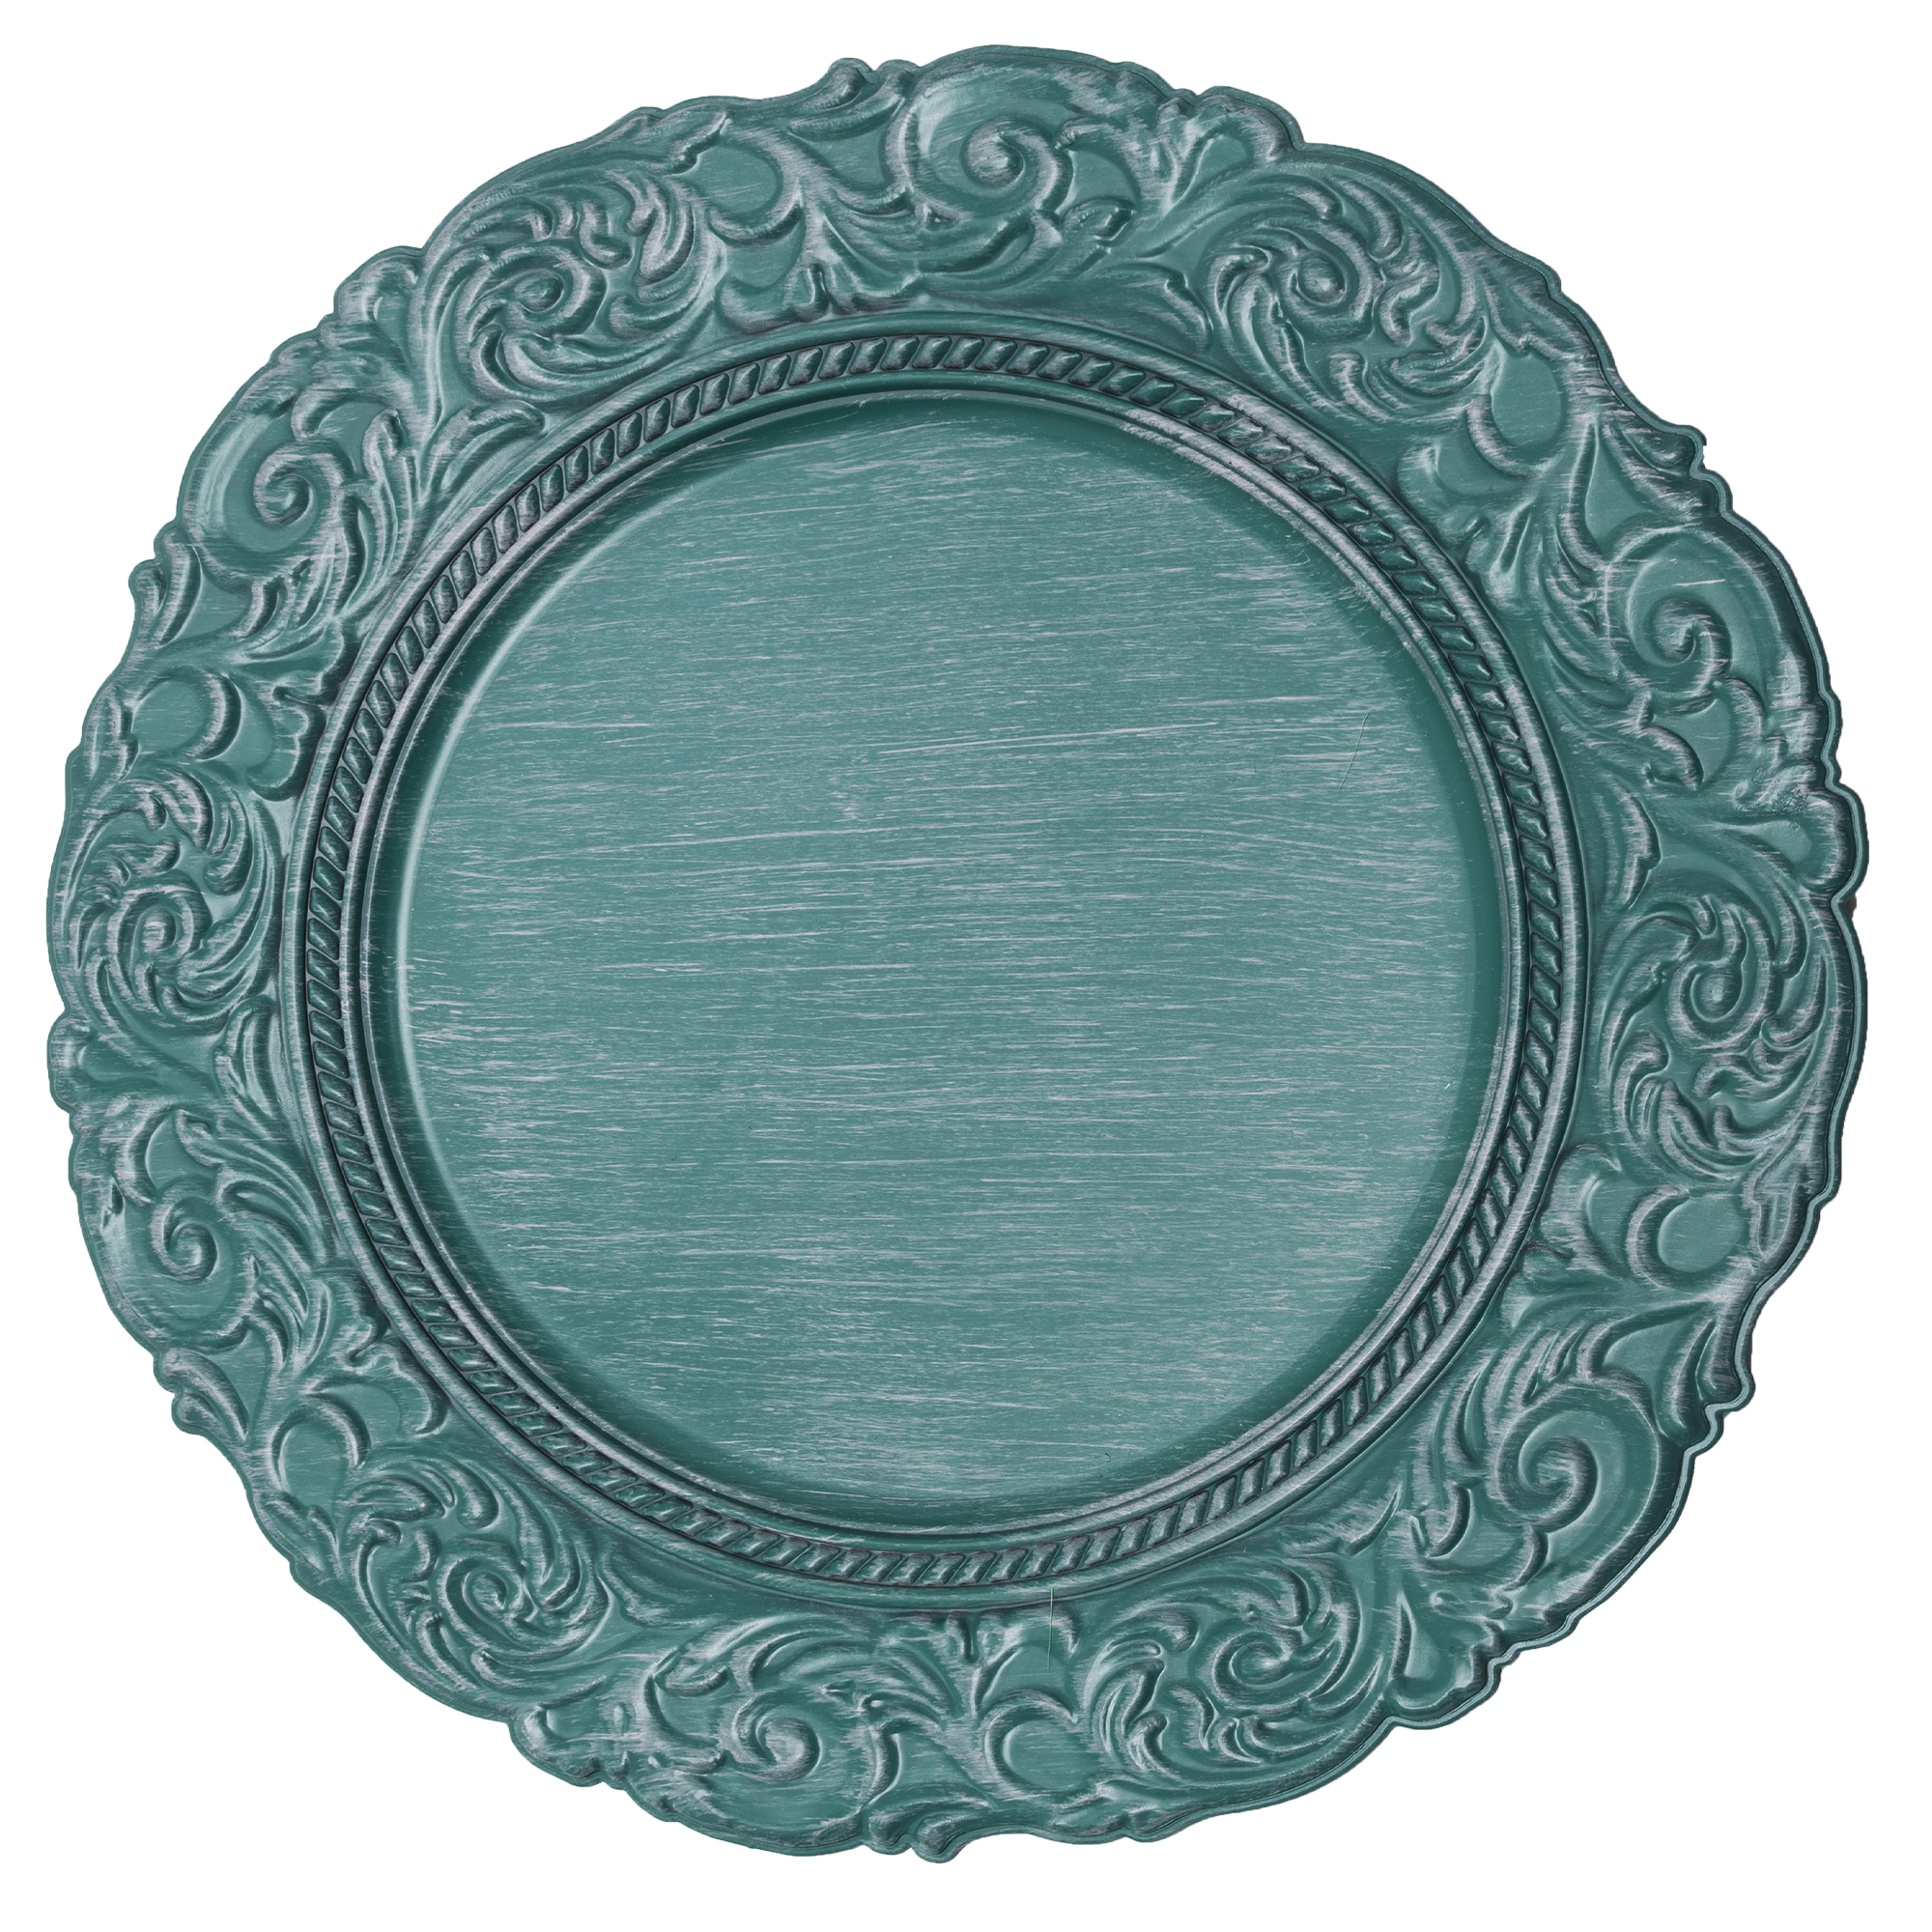 Antique Look Plastic Charger Plate 14" - Teal